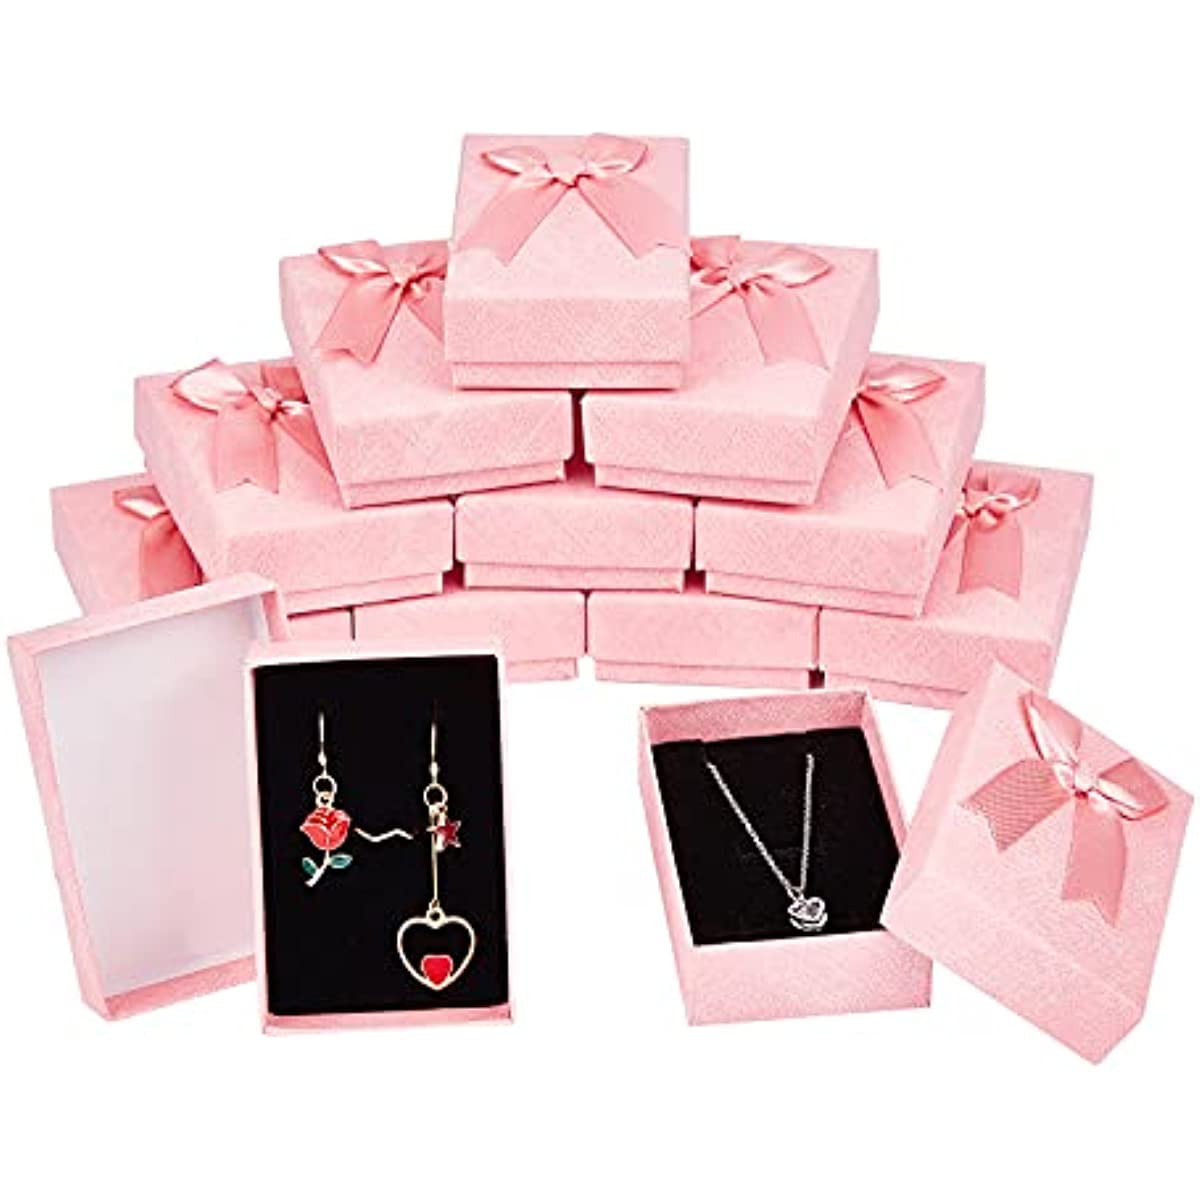 96 Pieces Jewelry Gift Boxes Set Empty Jewelry Boxes Small Gift Boxes for  Jewelry Cardboard Boxes for Jewelry Packaging with Ribbon Bowknot for